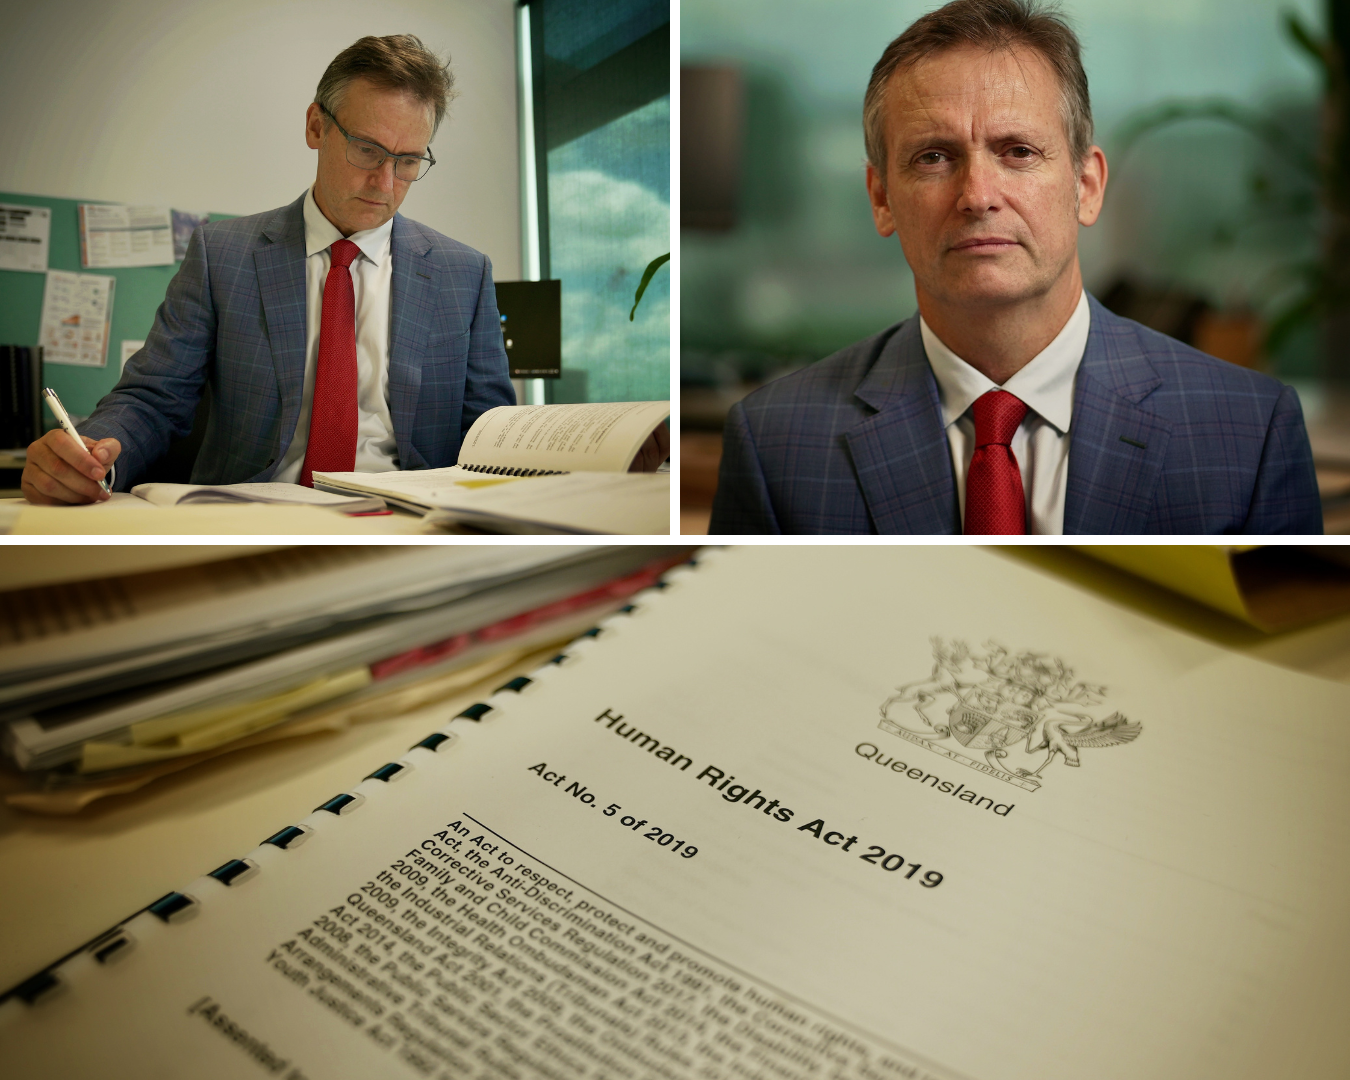 A collage shows a man working and staring at the camera, with the human rights act.